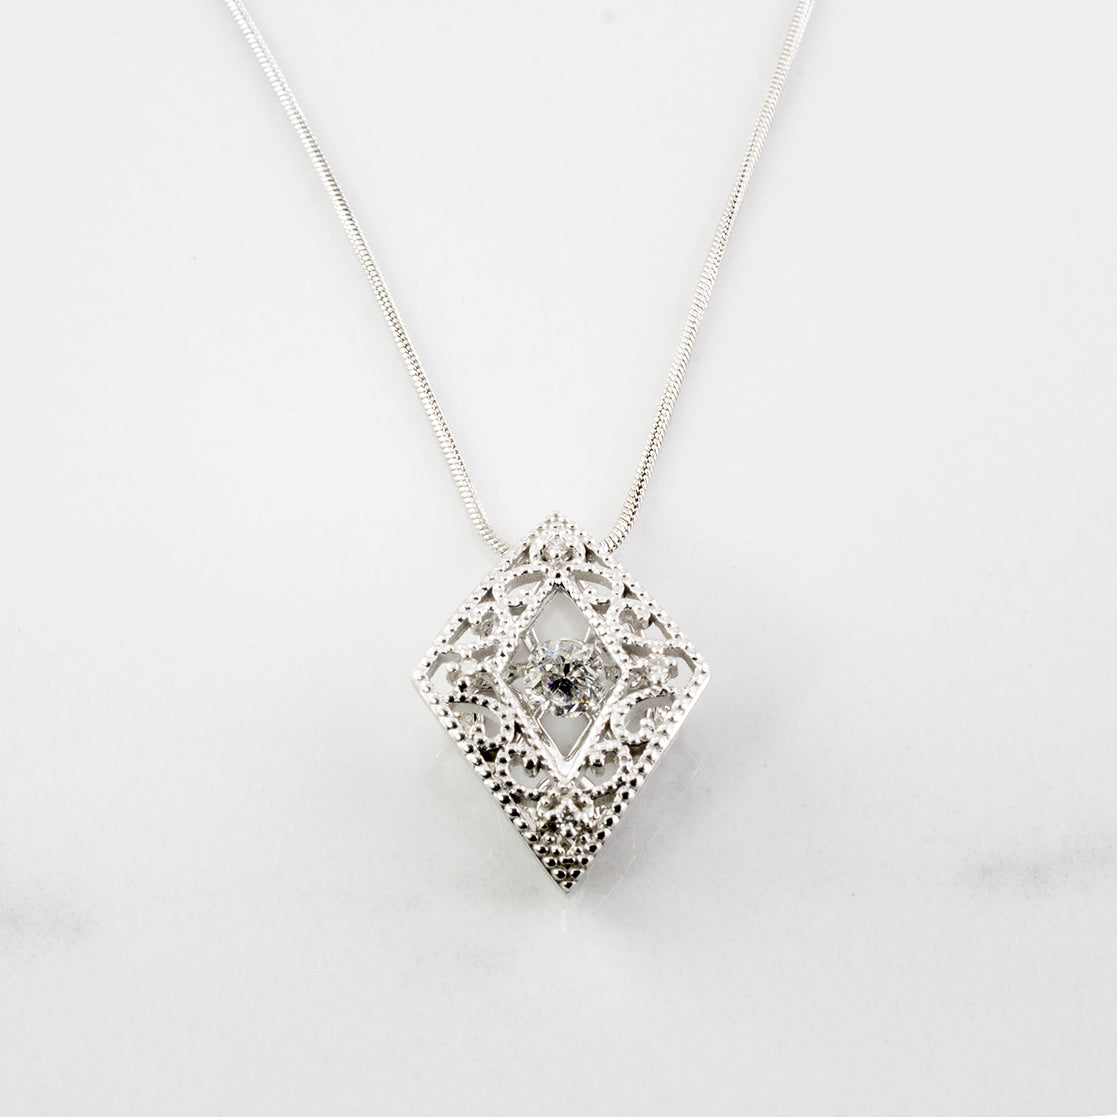 Love in Motion' Necklace With Canadian Diamonds | 0.24 ctw | SZ 16